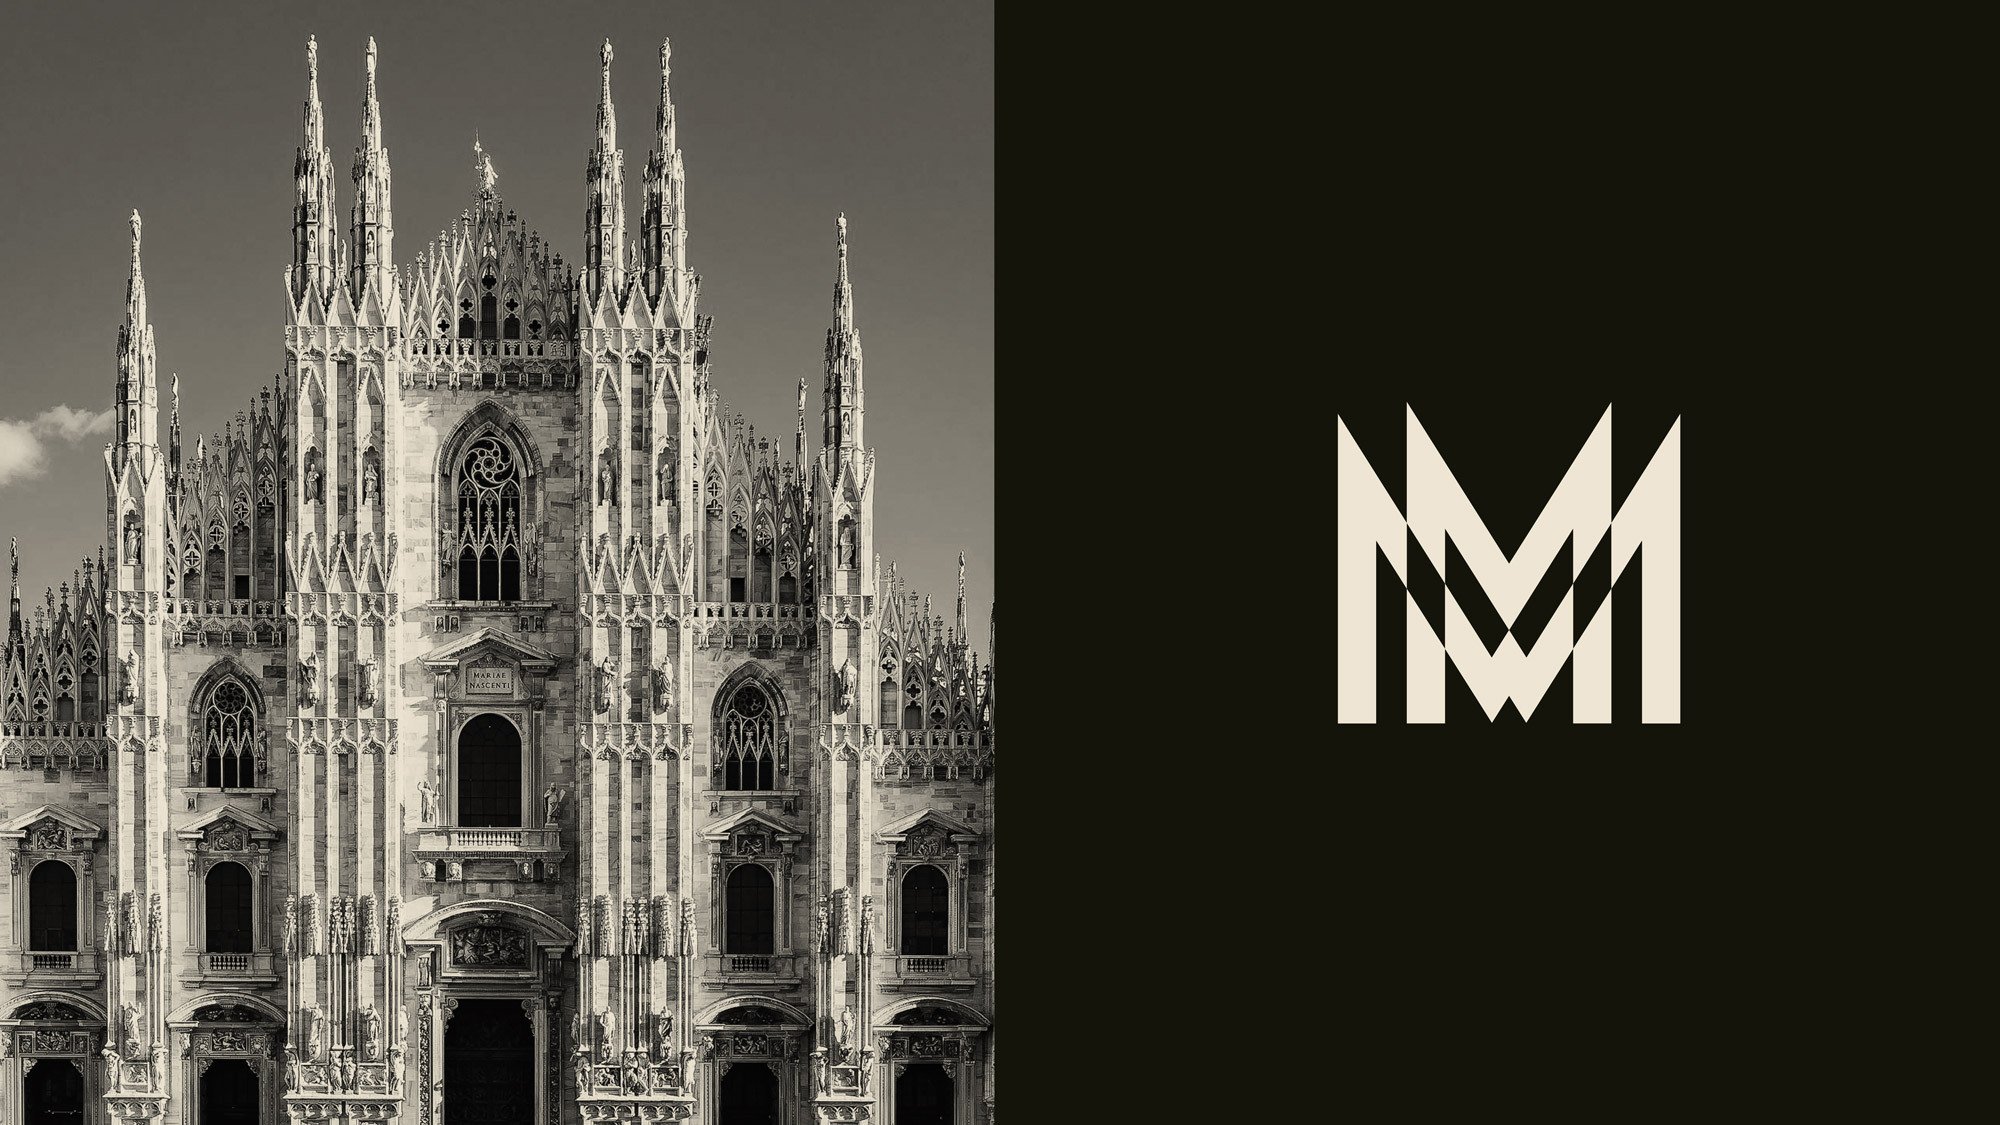 Logo based on Milan cathedral for Orchestra Sinfonica di Milano designed by Landor & Fitch 